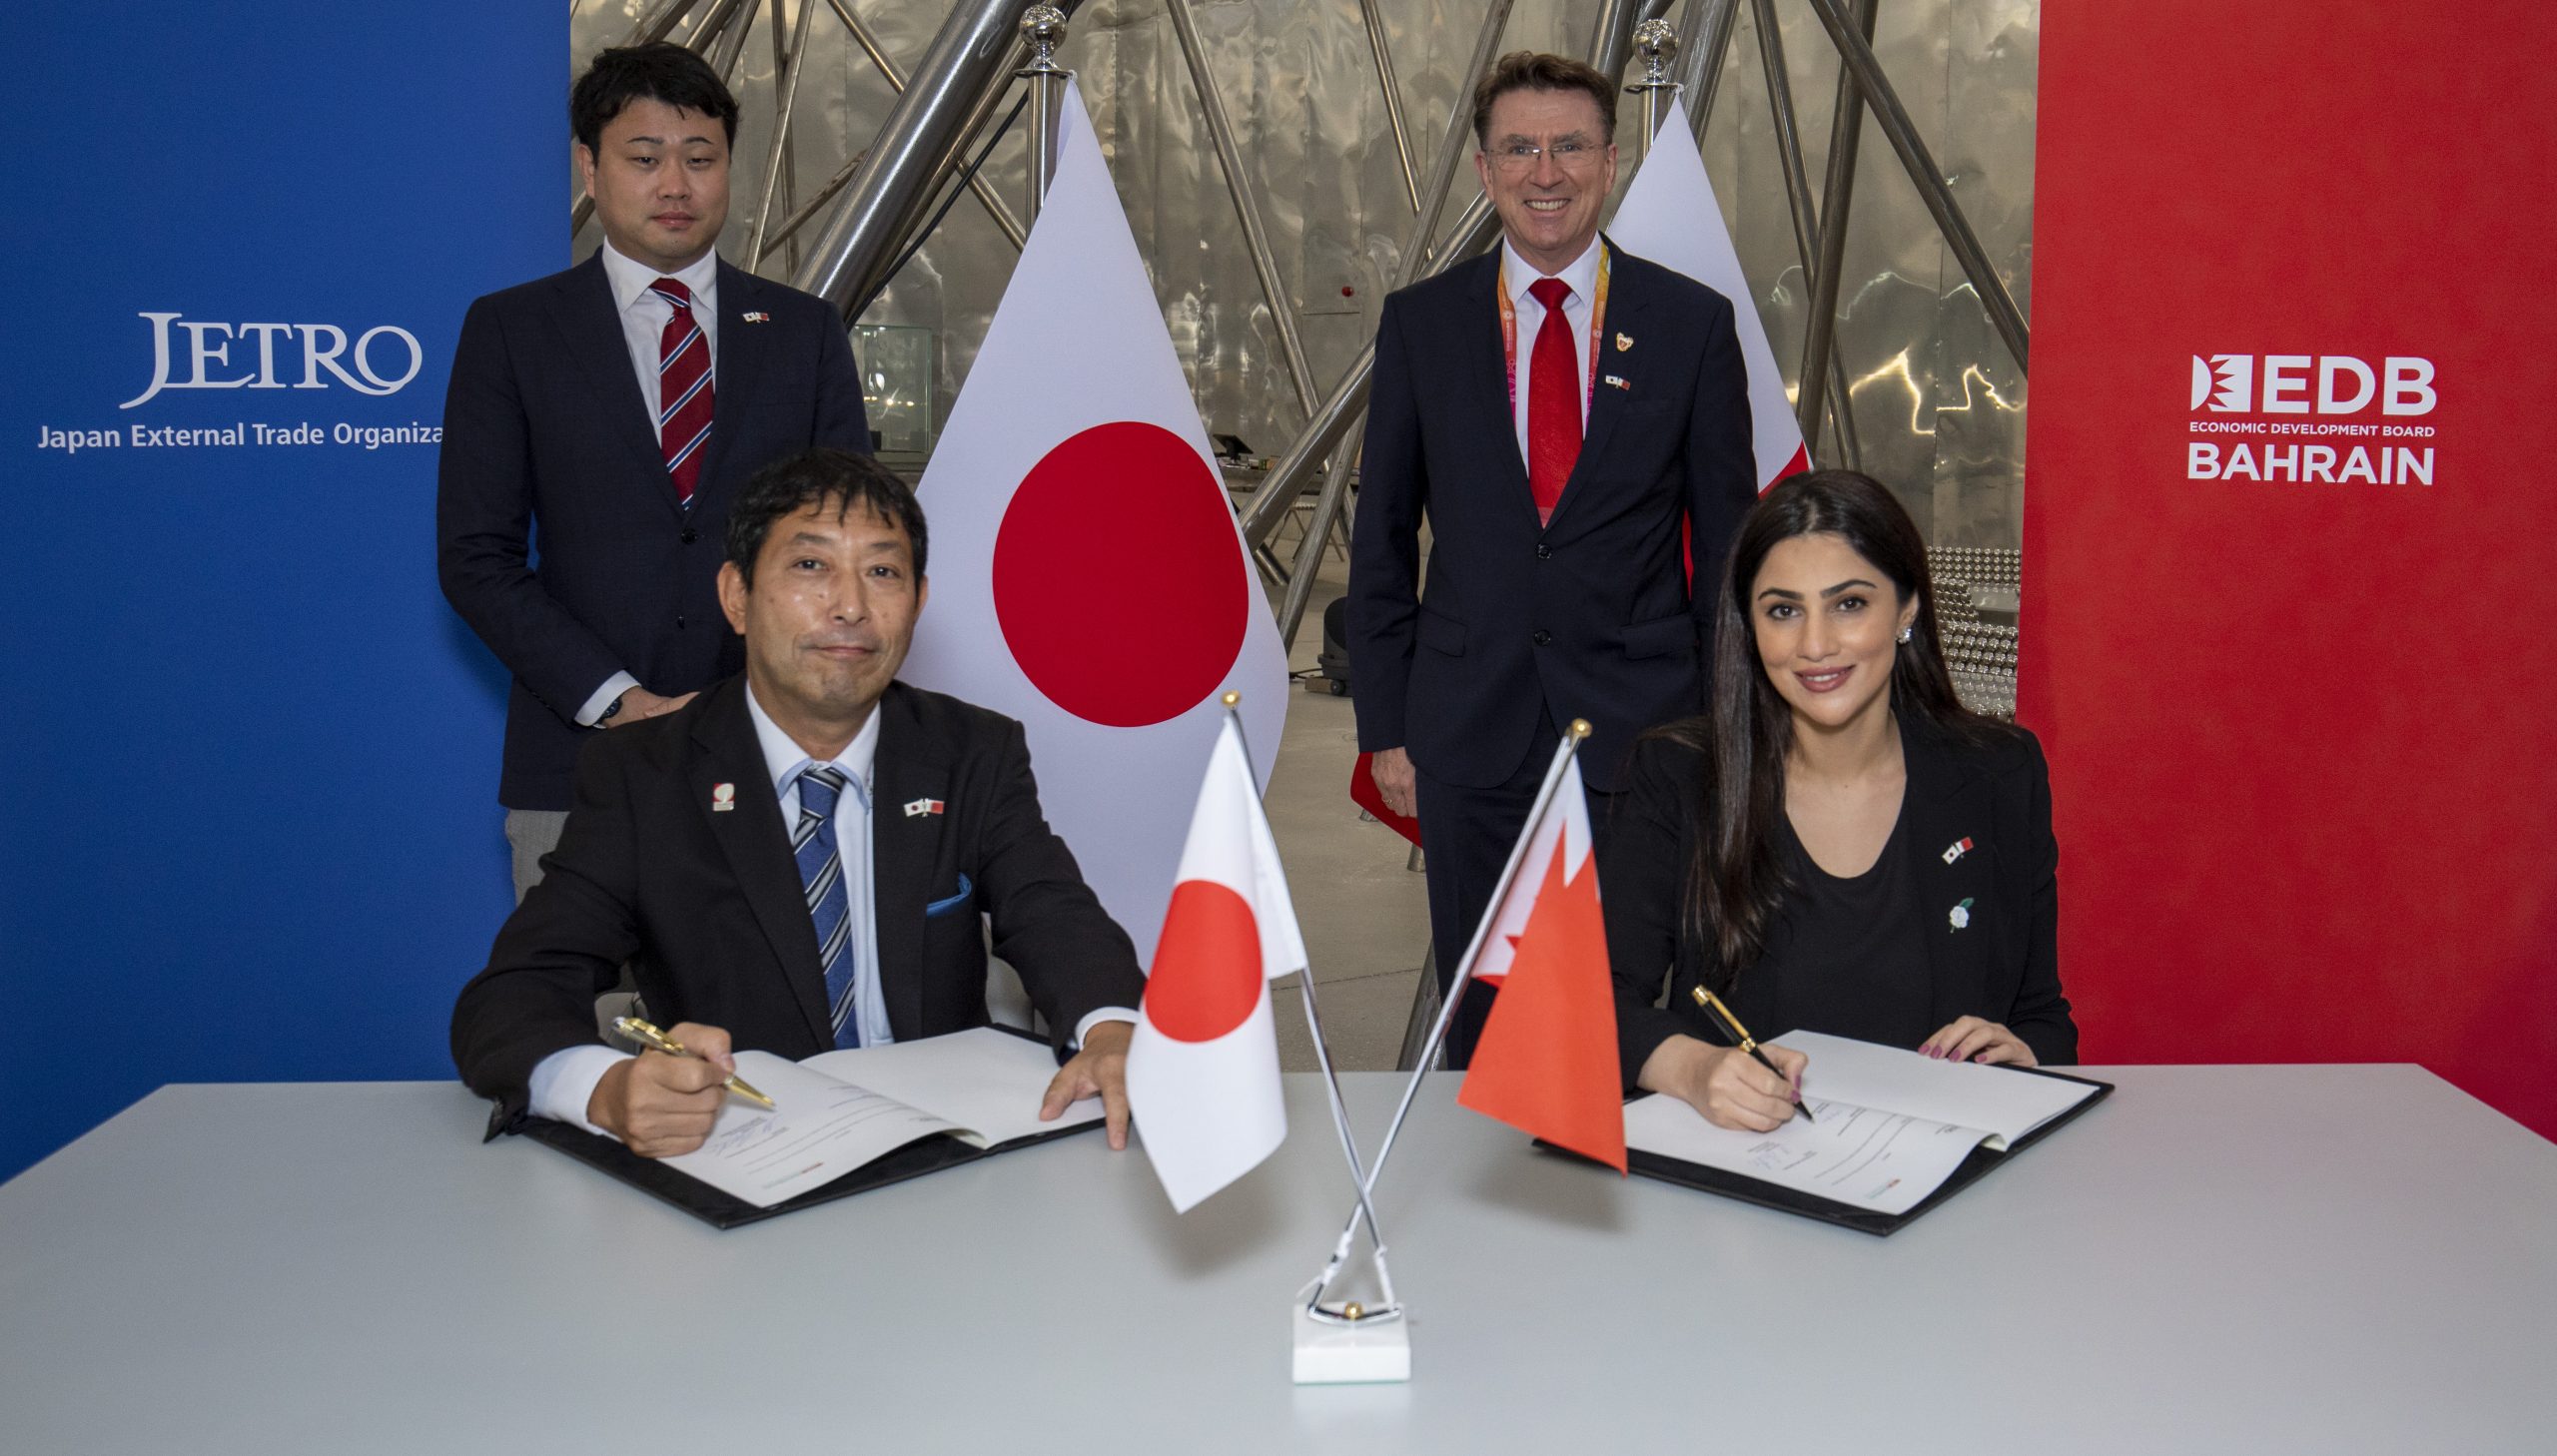 Bahrain EDB and Japan External Trade Organization sign MoU to promote direct investments